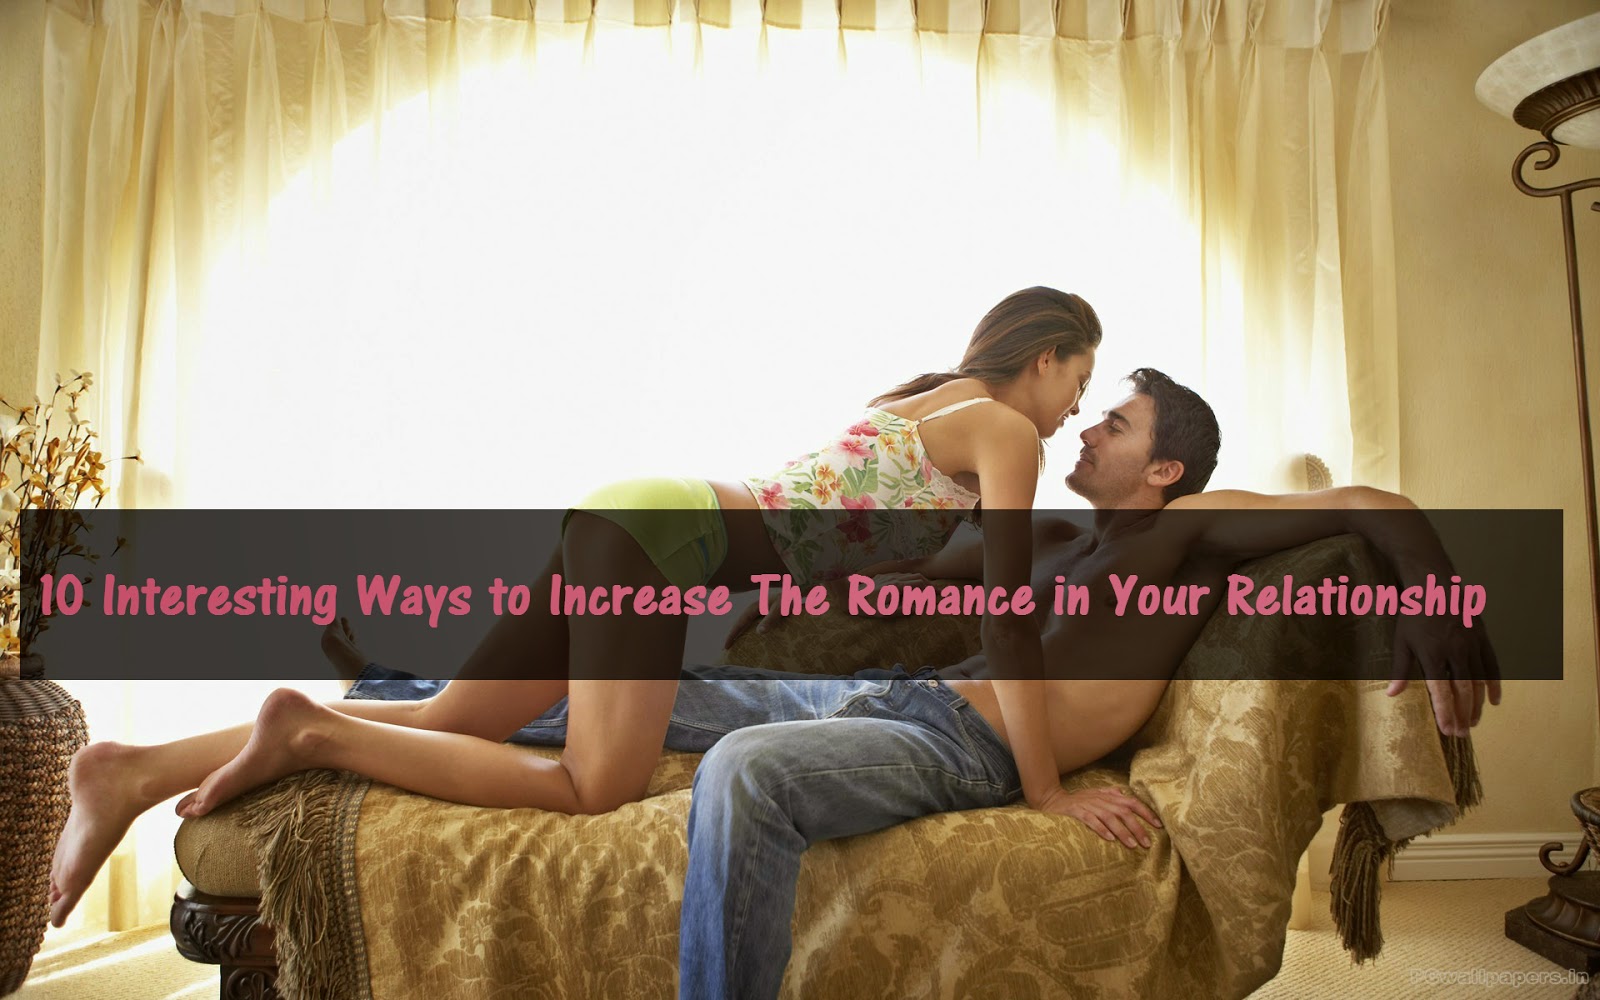 10 Interesting Ways to Increase The Romance in Your